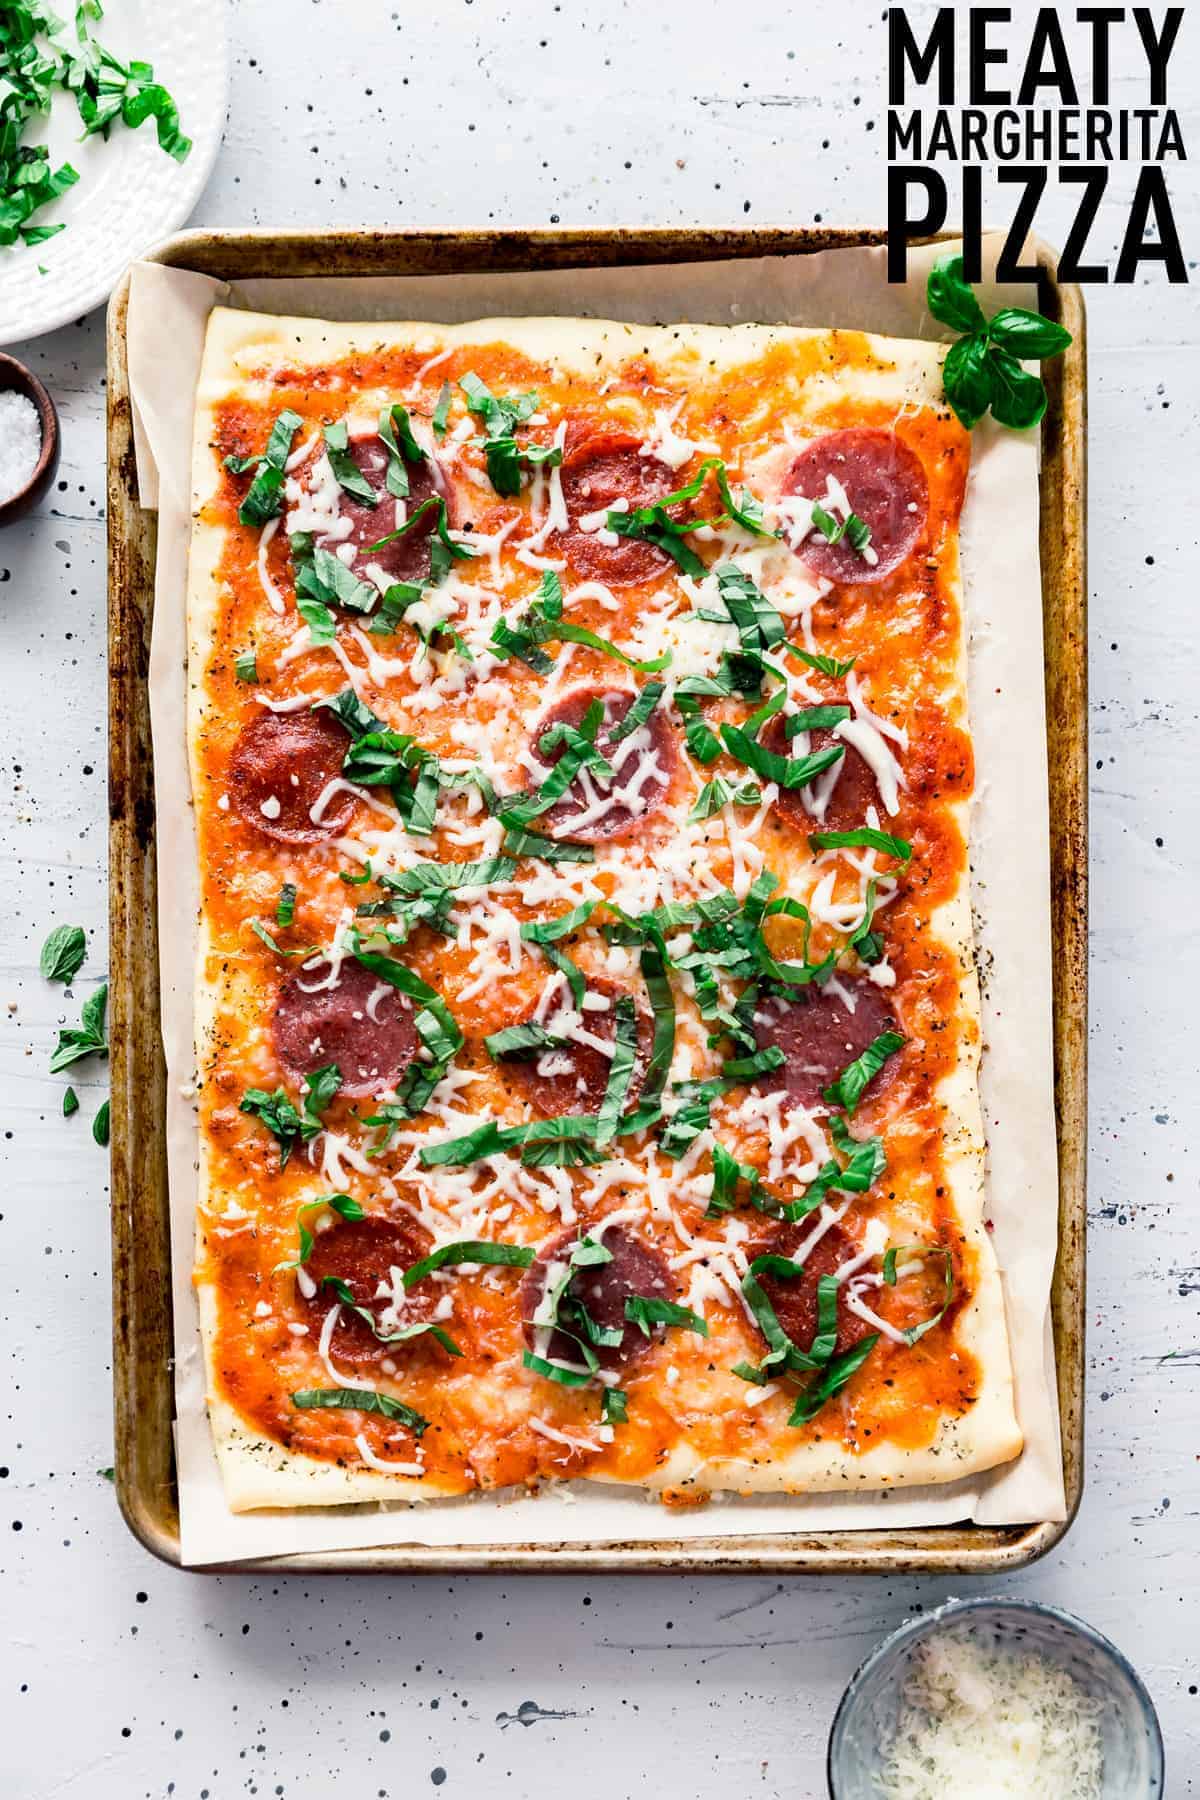 Meaty Margherita Pizza made with the traditional tomatoes, cheese, and basil but with added pepperoni and salami to make it one crowd pleasing pizza done in only 30 minutes.